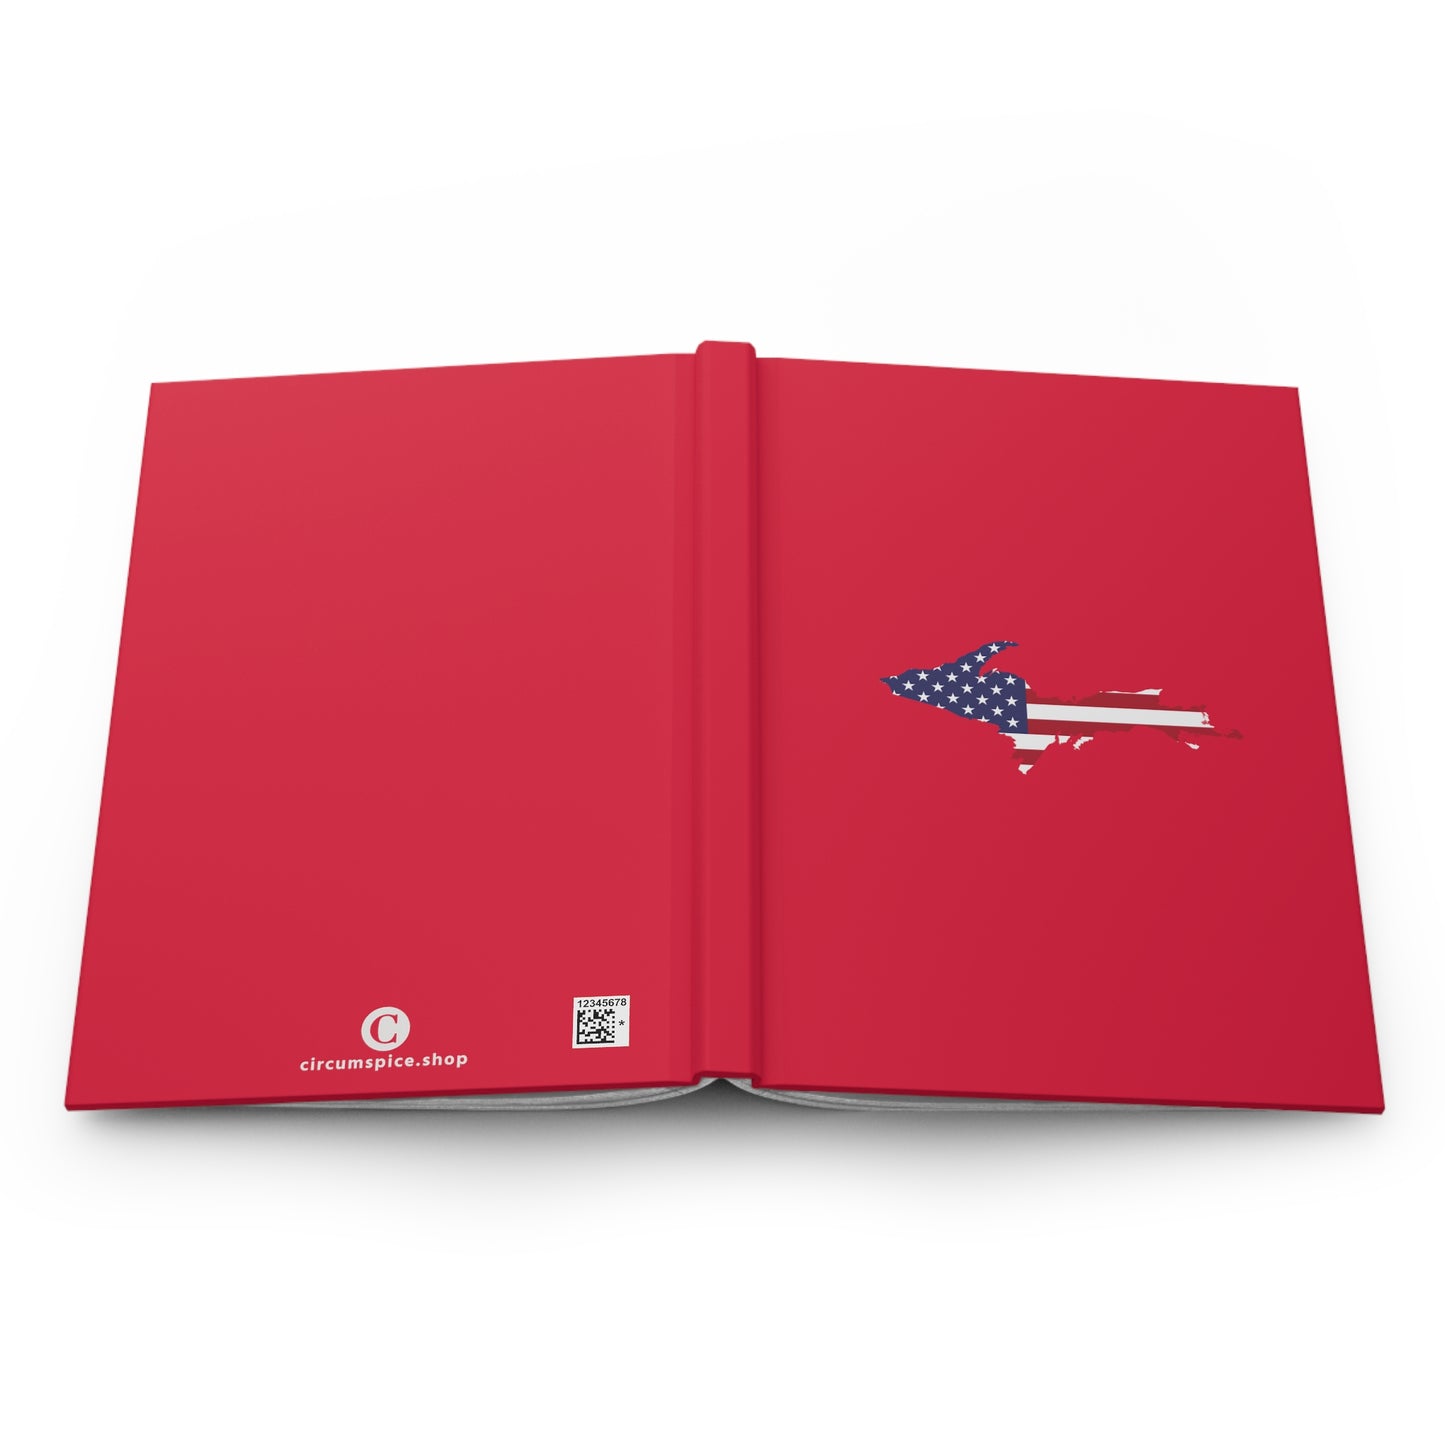 Michigan Upper Peninsula Hardcover Journal (w/ UP USA Flag) | Ruled - Lighthouse Red